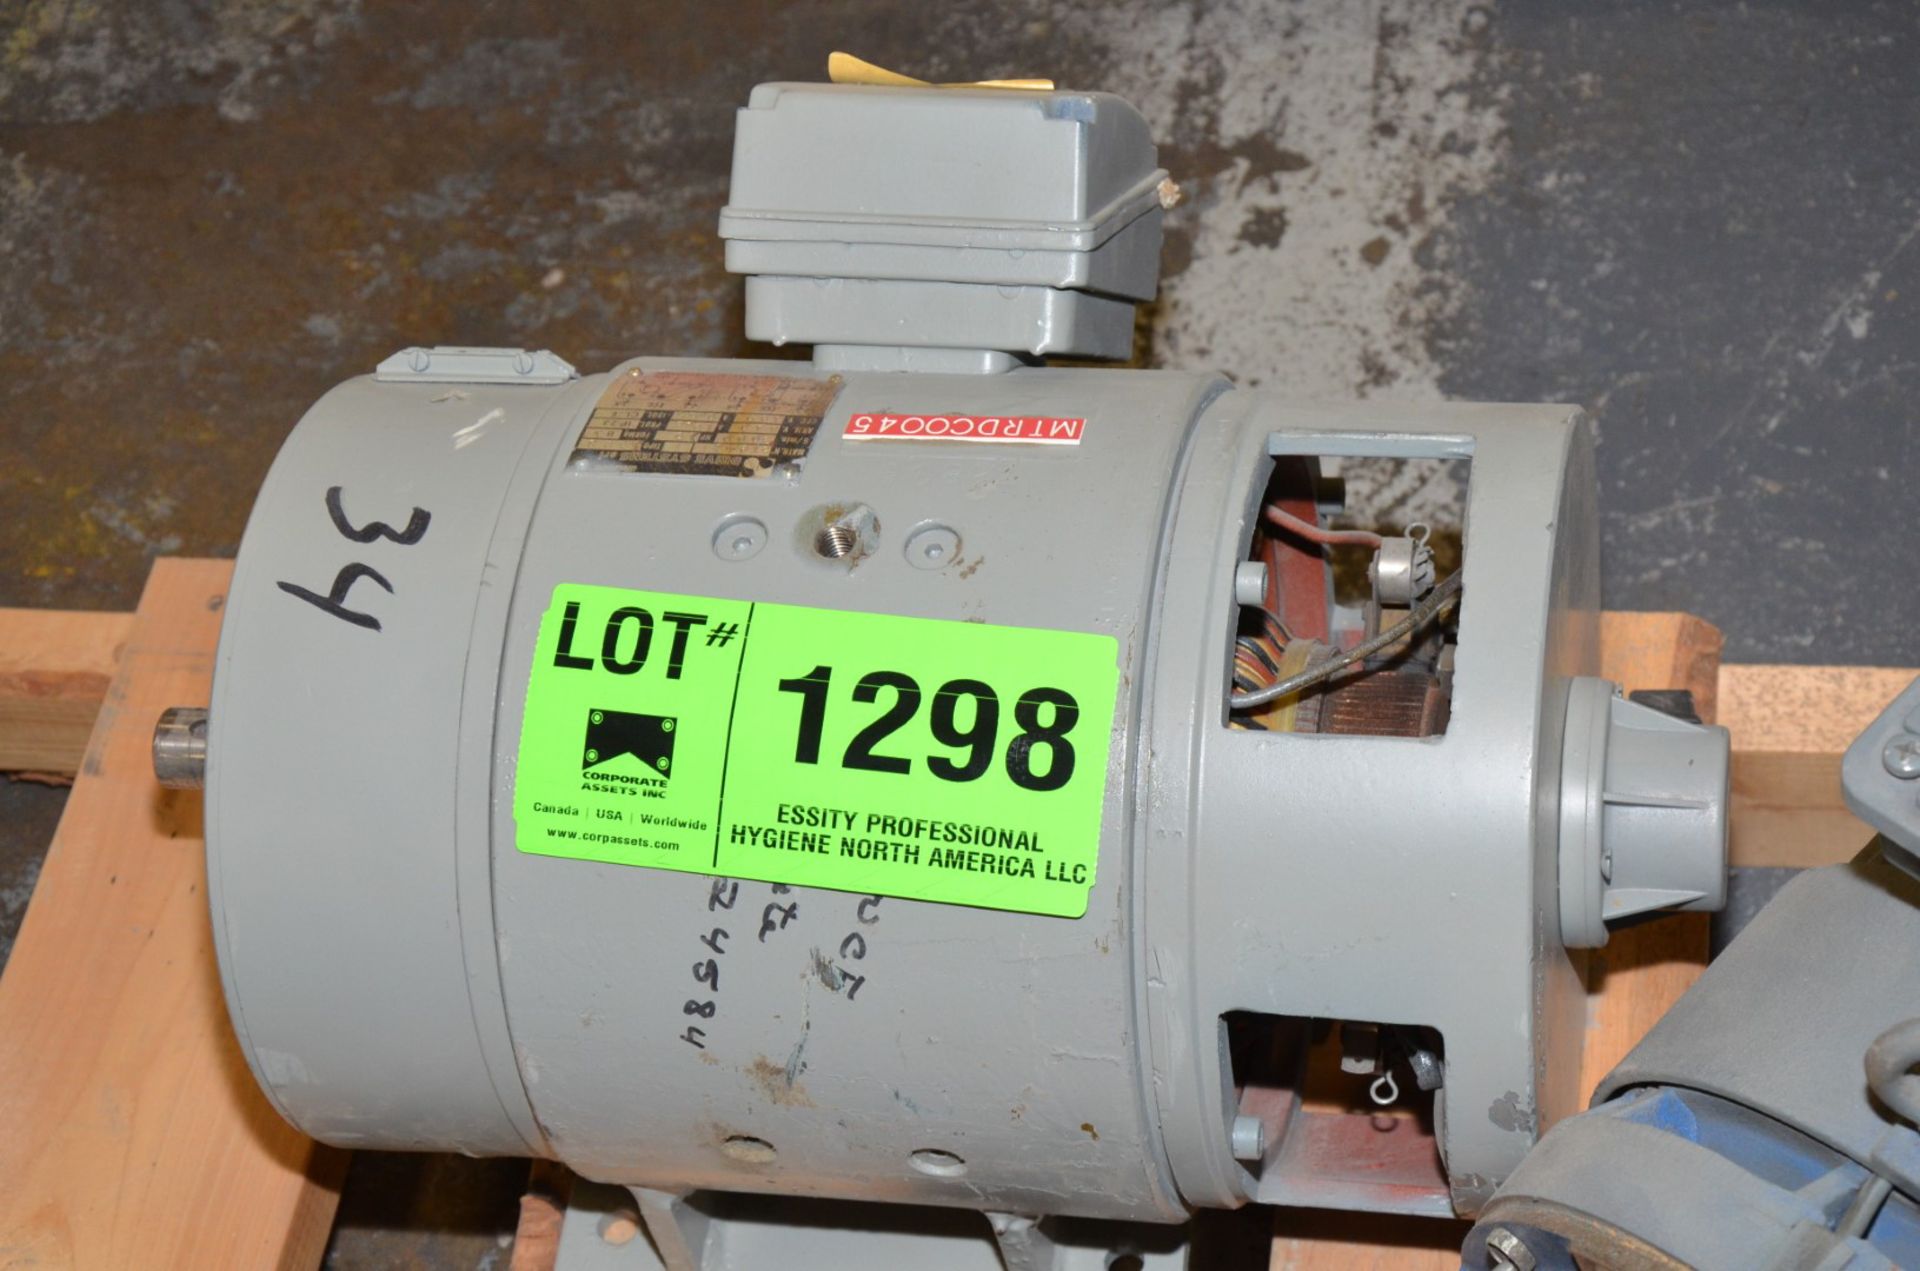 DS 10 HP 3000 RPM 460V ELECTRIC MOTOR [RIGGING FEE FOR LOT #1298 - $25 USD PLUS APPLICABLE TAXES]